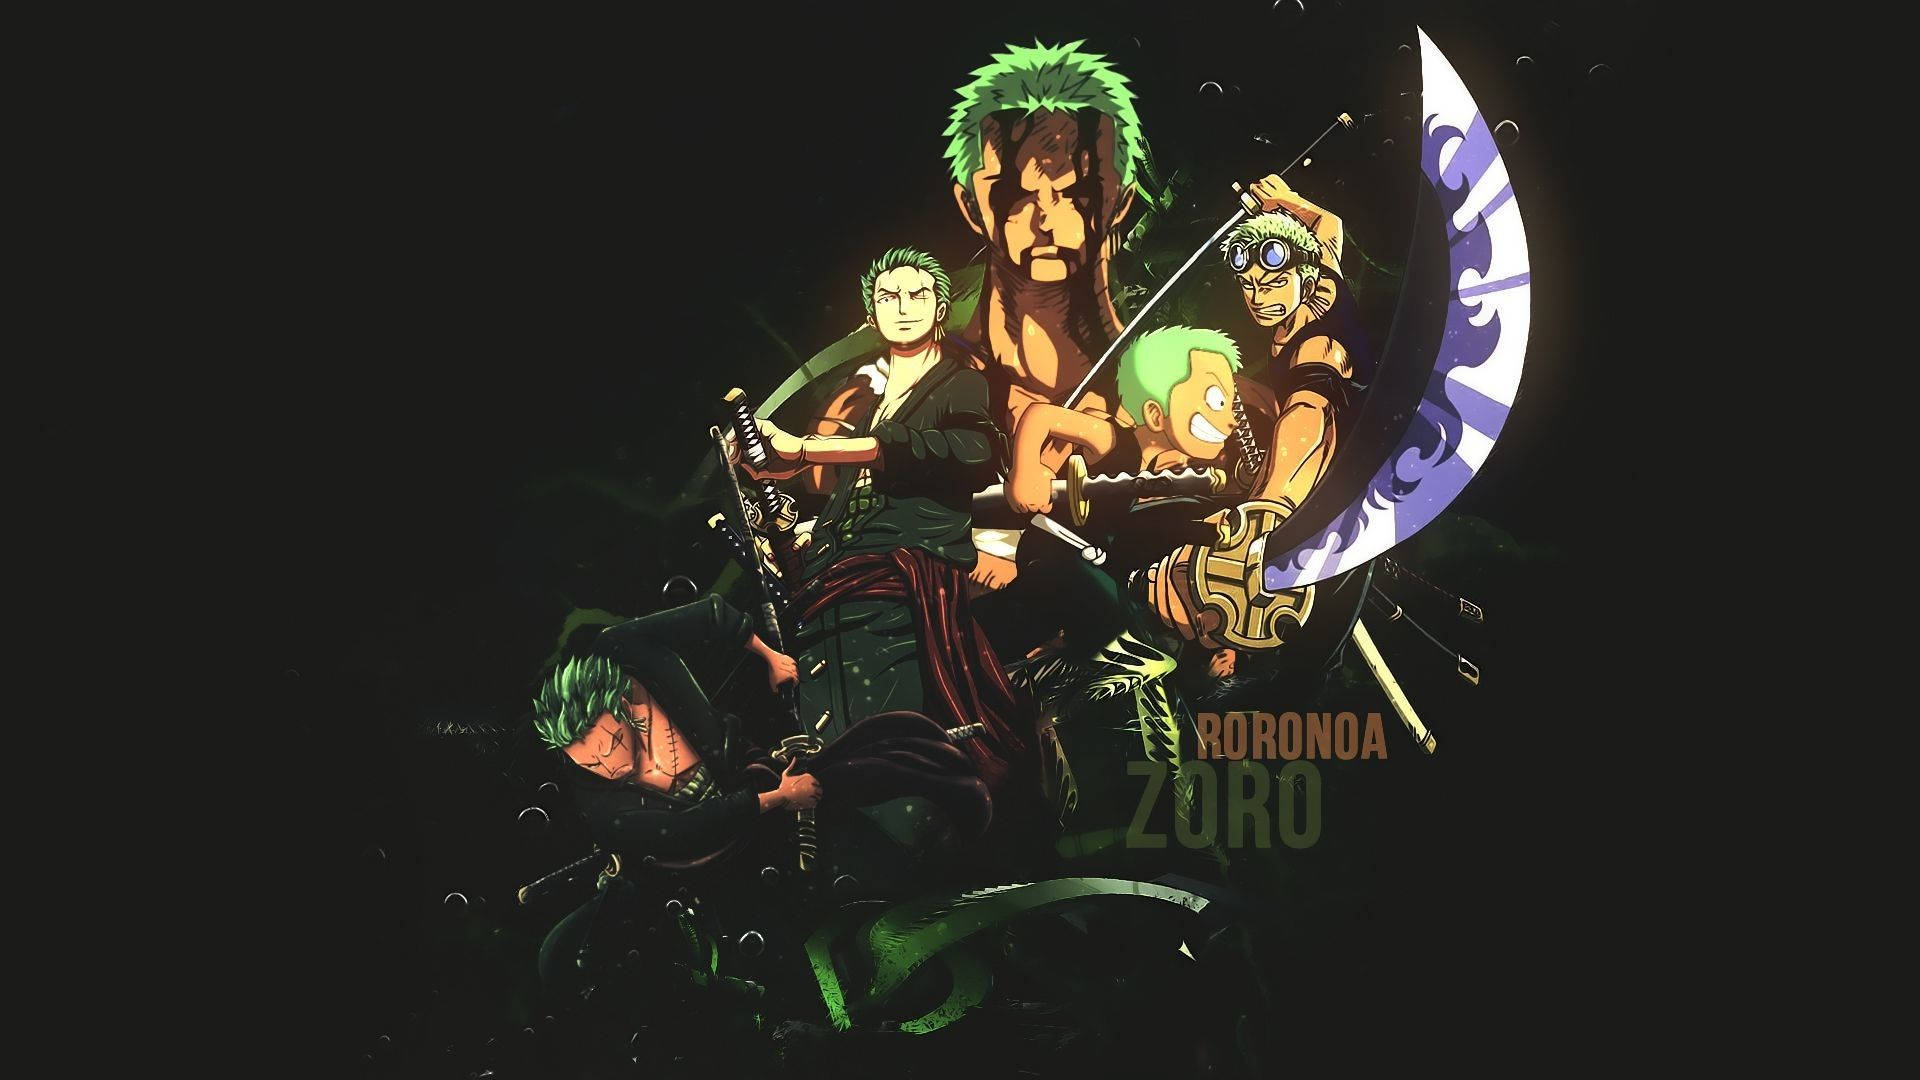 Follow Zoro On His Travels As He Works To Become The World’s Greatest Swordsman. Background